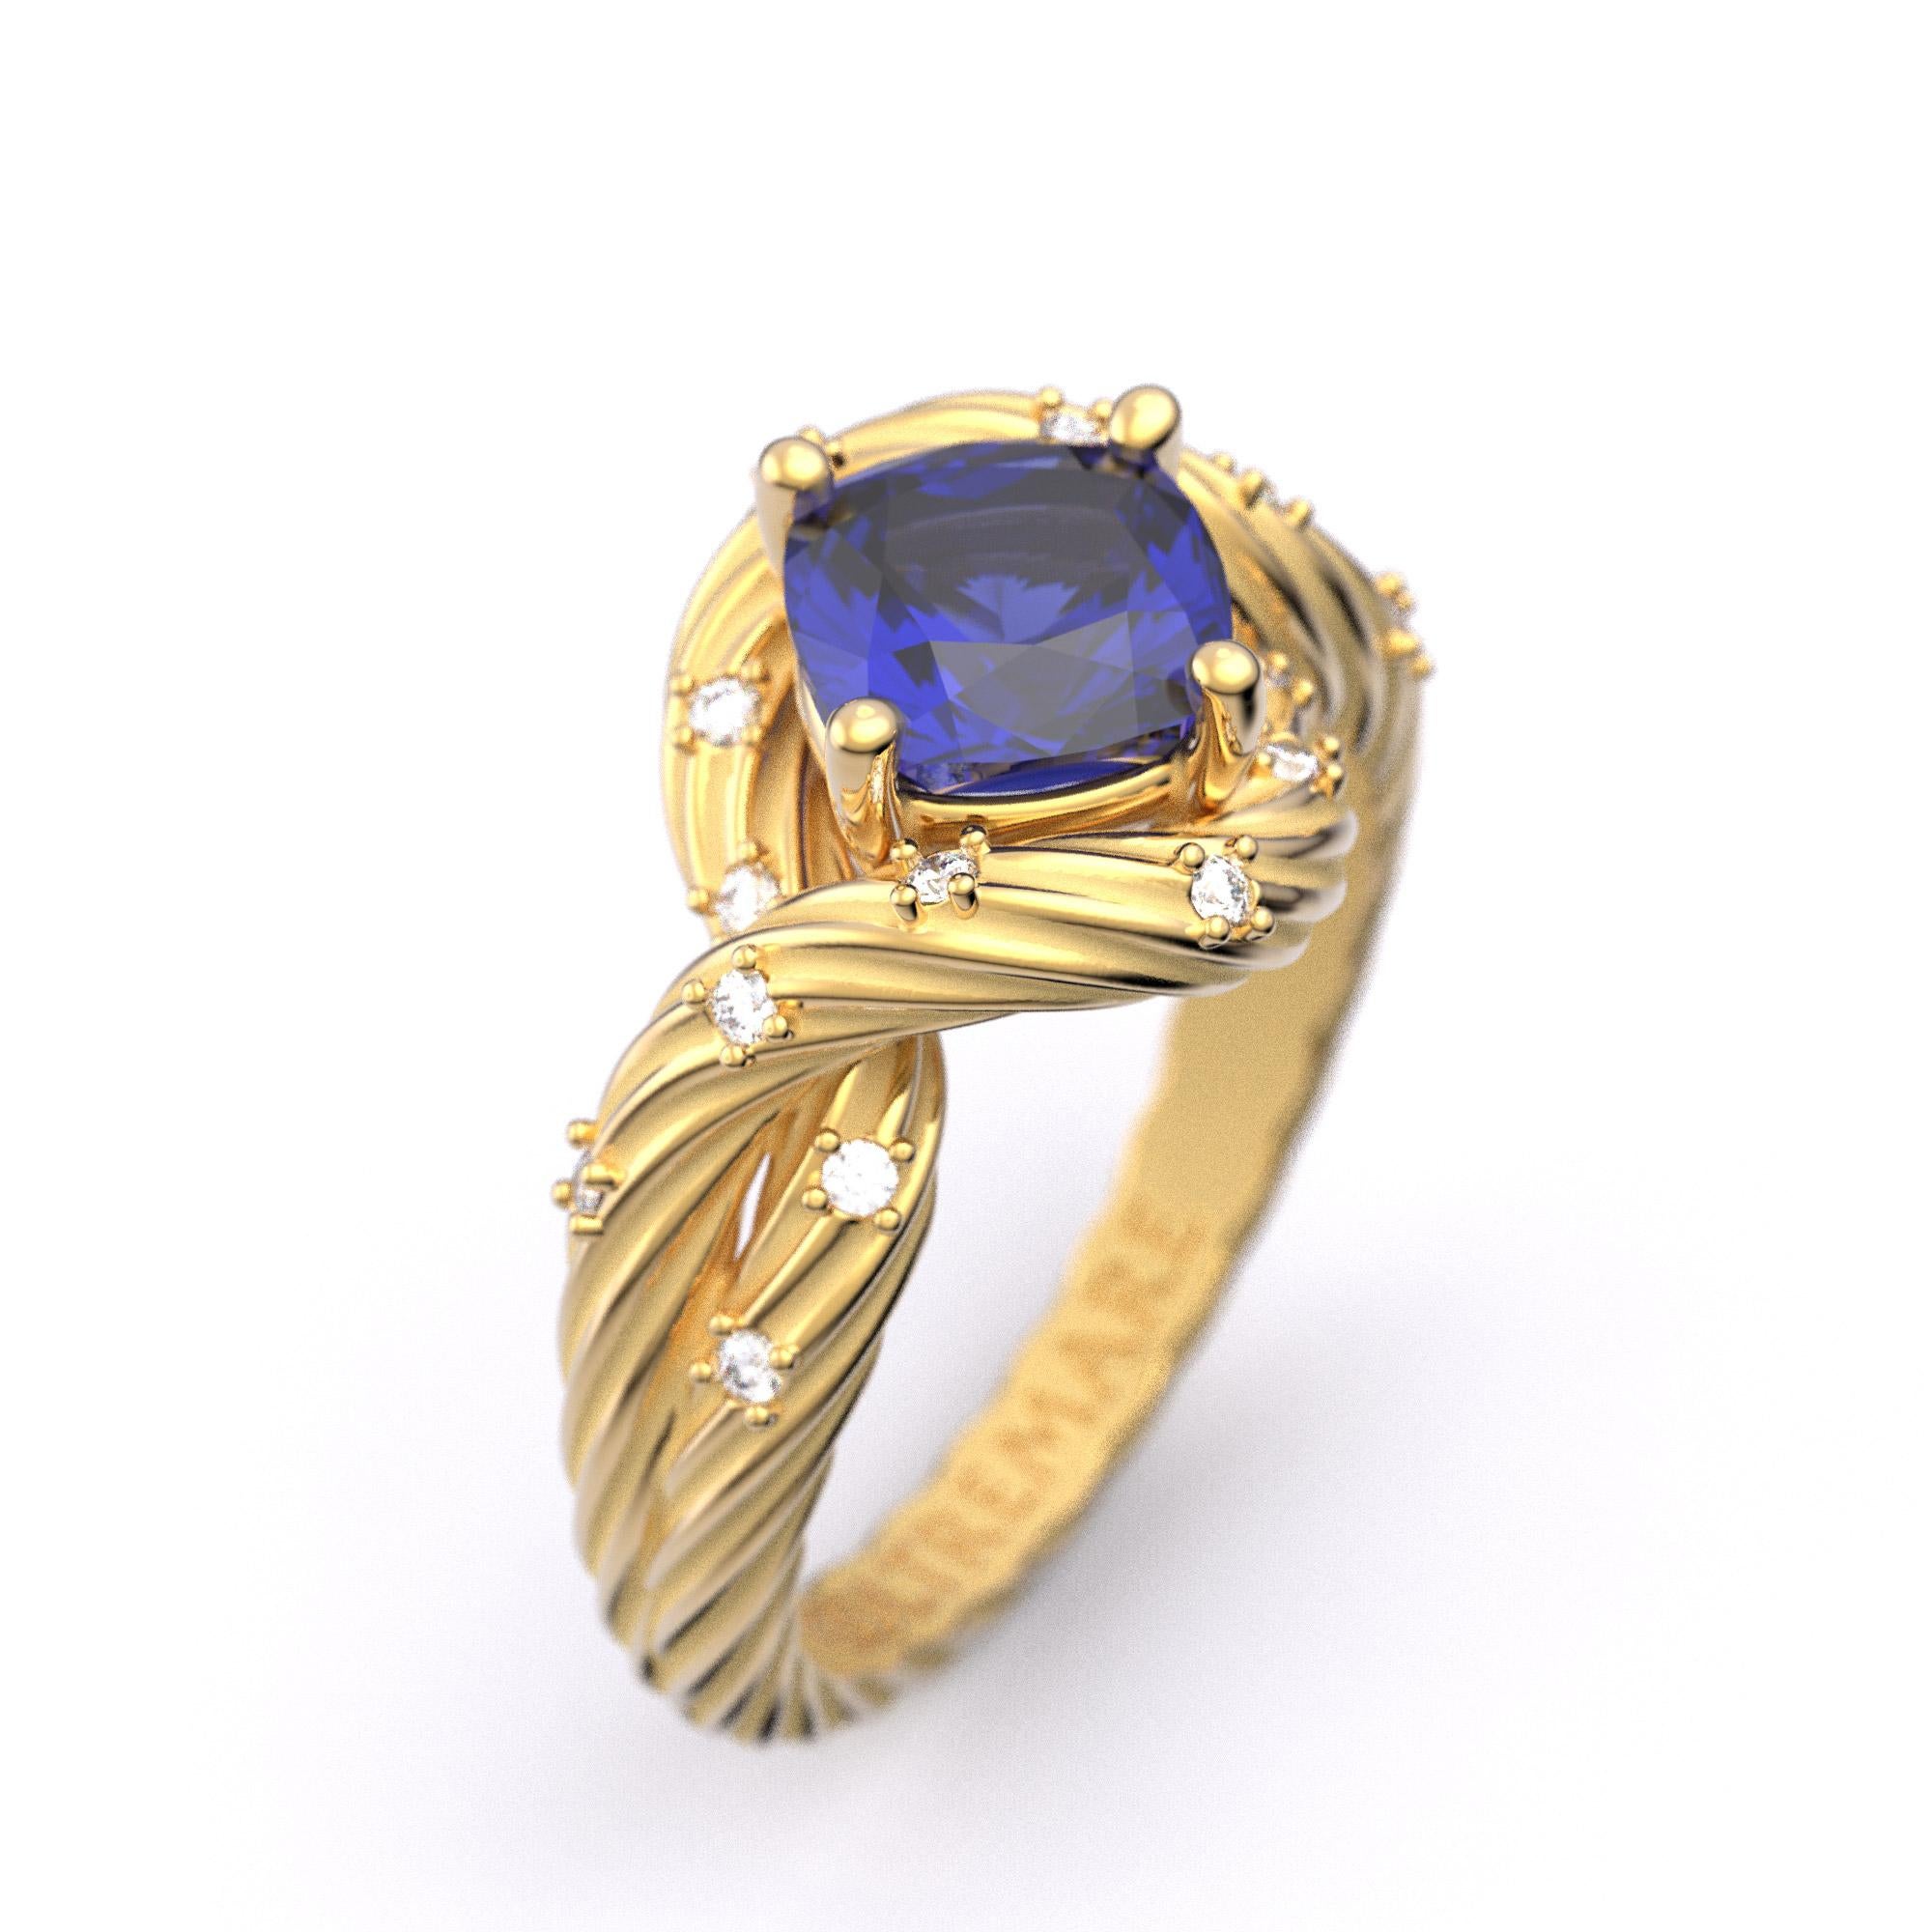 For Sale:  Tanzanite and Diamonds Ring 14k Solid Gold, Italian Fine Jewelry, made to order. 3